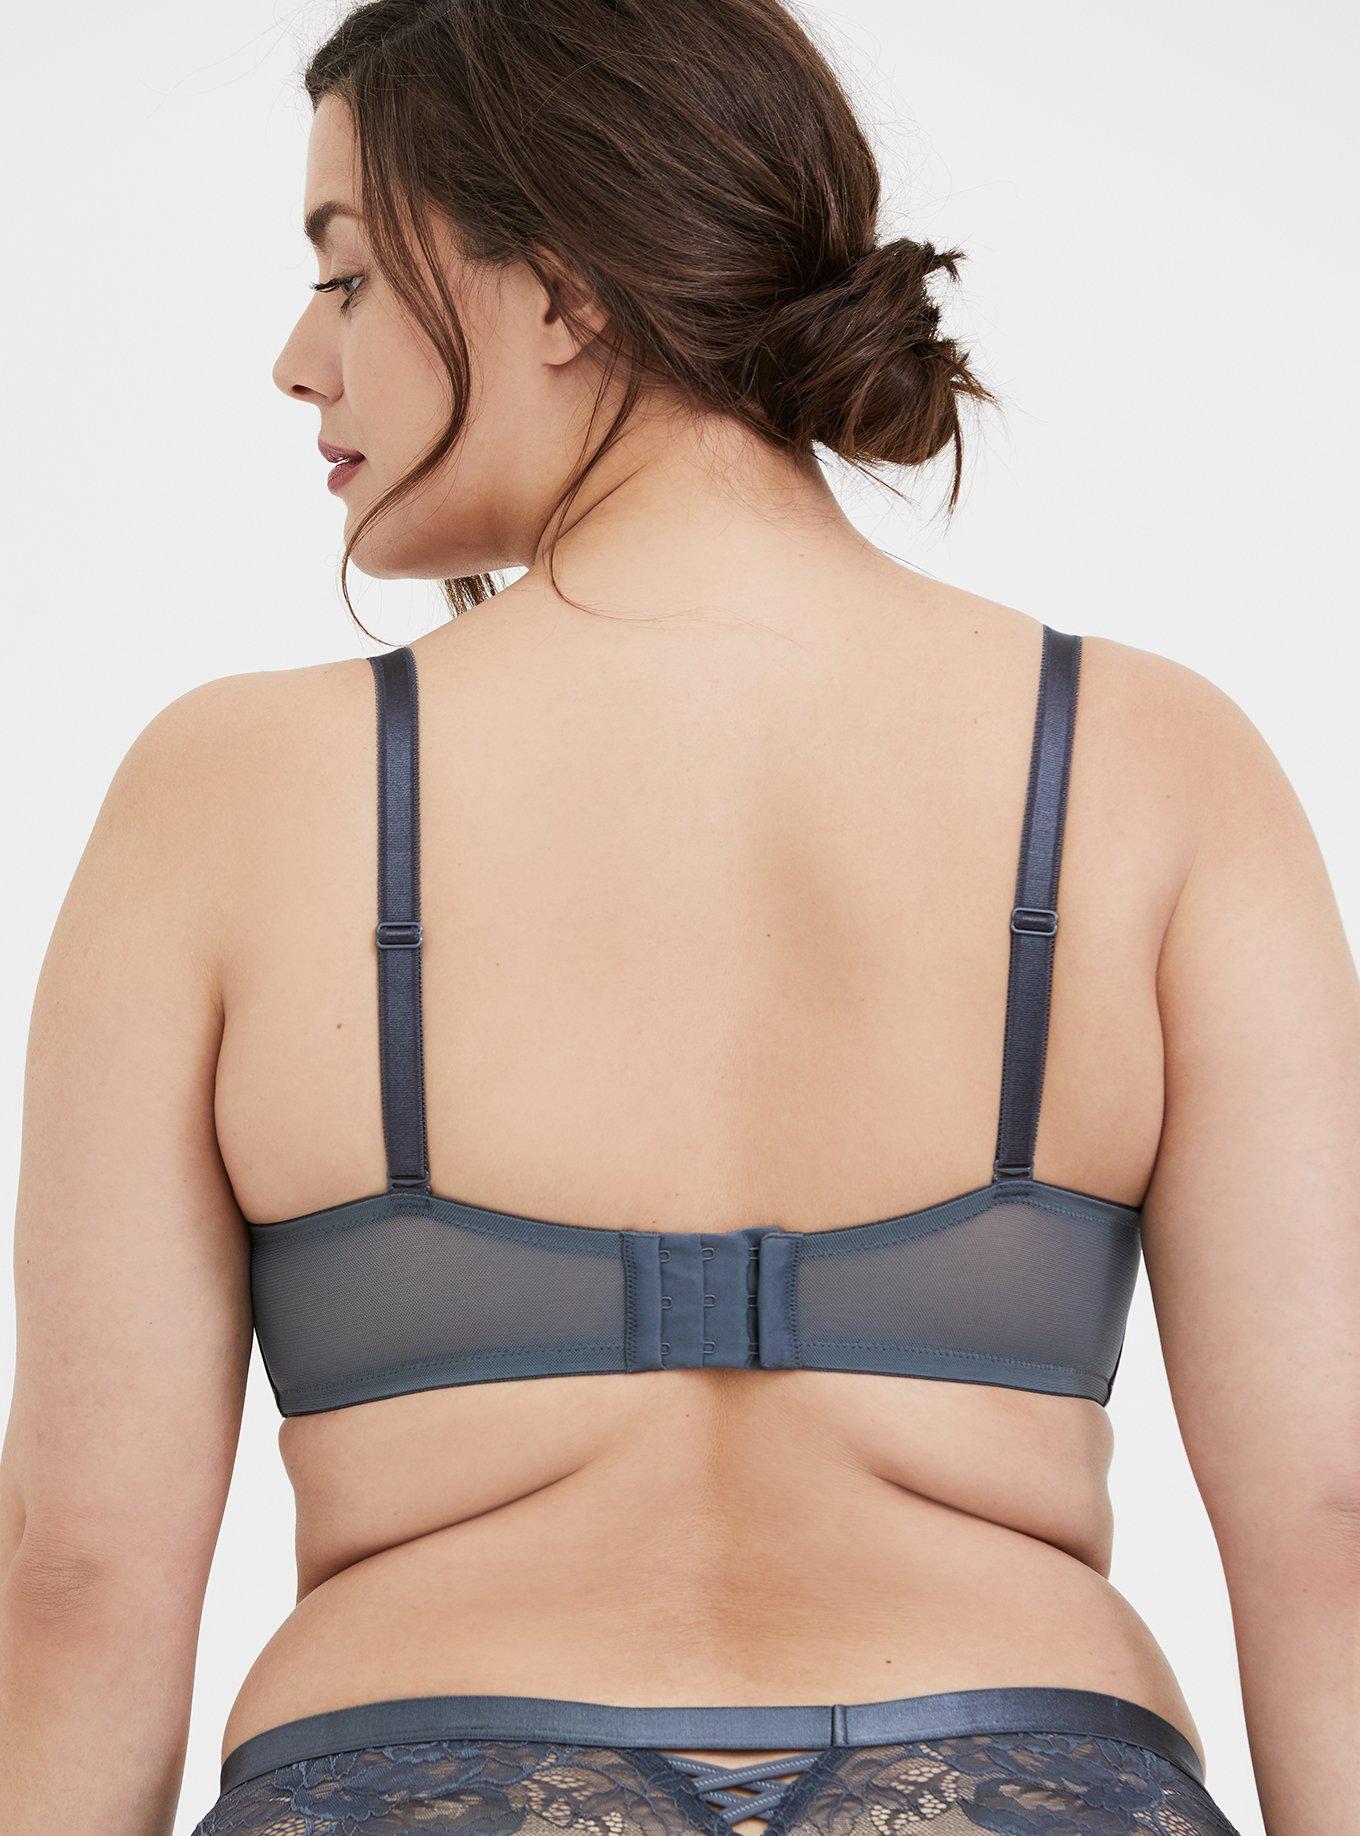 Comparing a 46B Torrid Smooth Push-up Plunge Bra (593033) with a